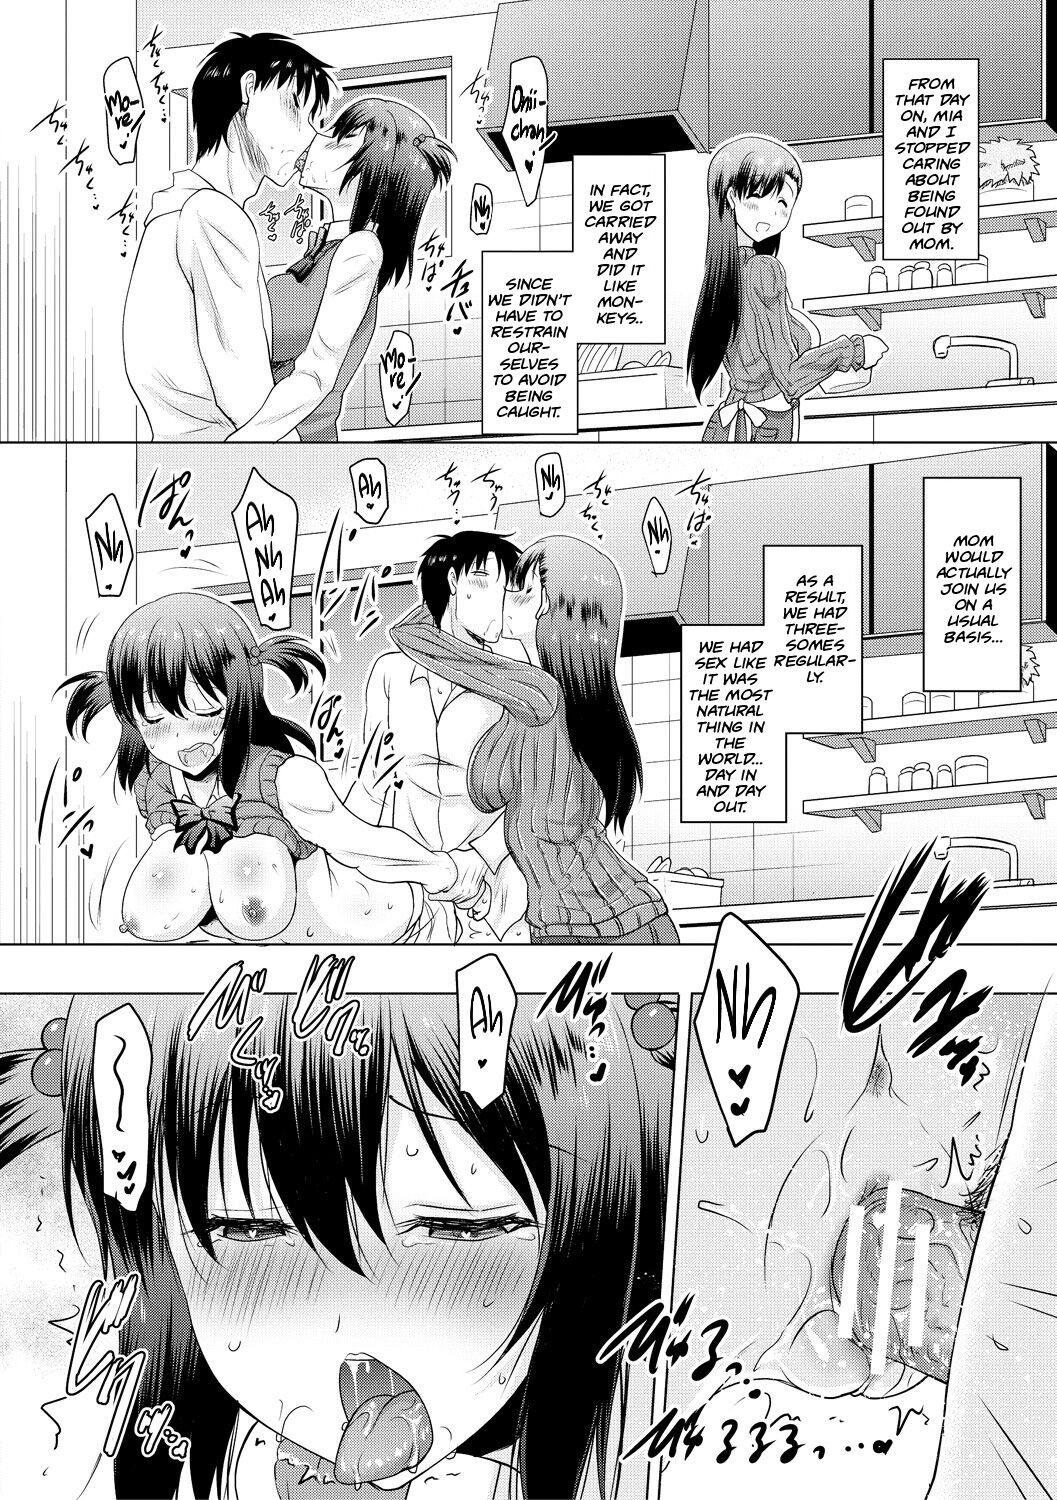 [Pony-R] I Can't Live Without My Little Sister's Tongue Chapter 01-02 + Secret Baby-making Sex with a Big-titted Mother and Daughter! (Kyonyuu Oyako no Shita to Shikyuu ni Renzoku Shasei) [English] [Team Rabu2] [Digital] 63